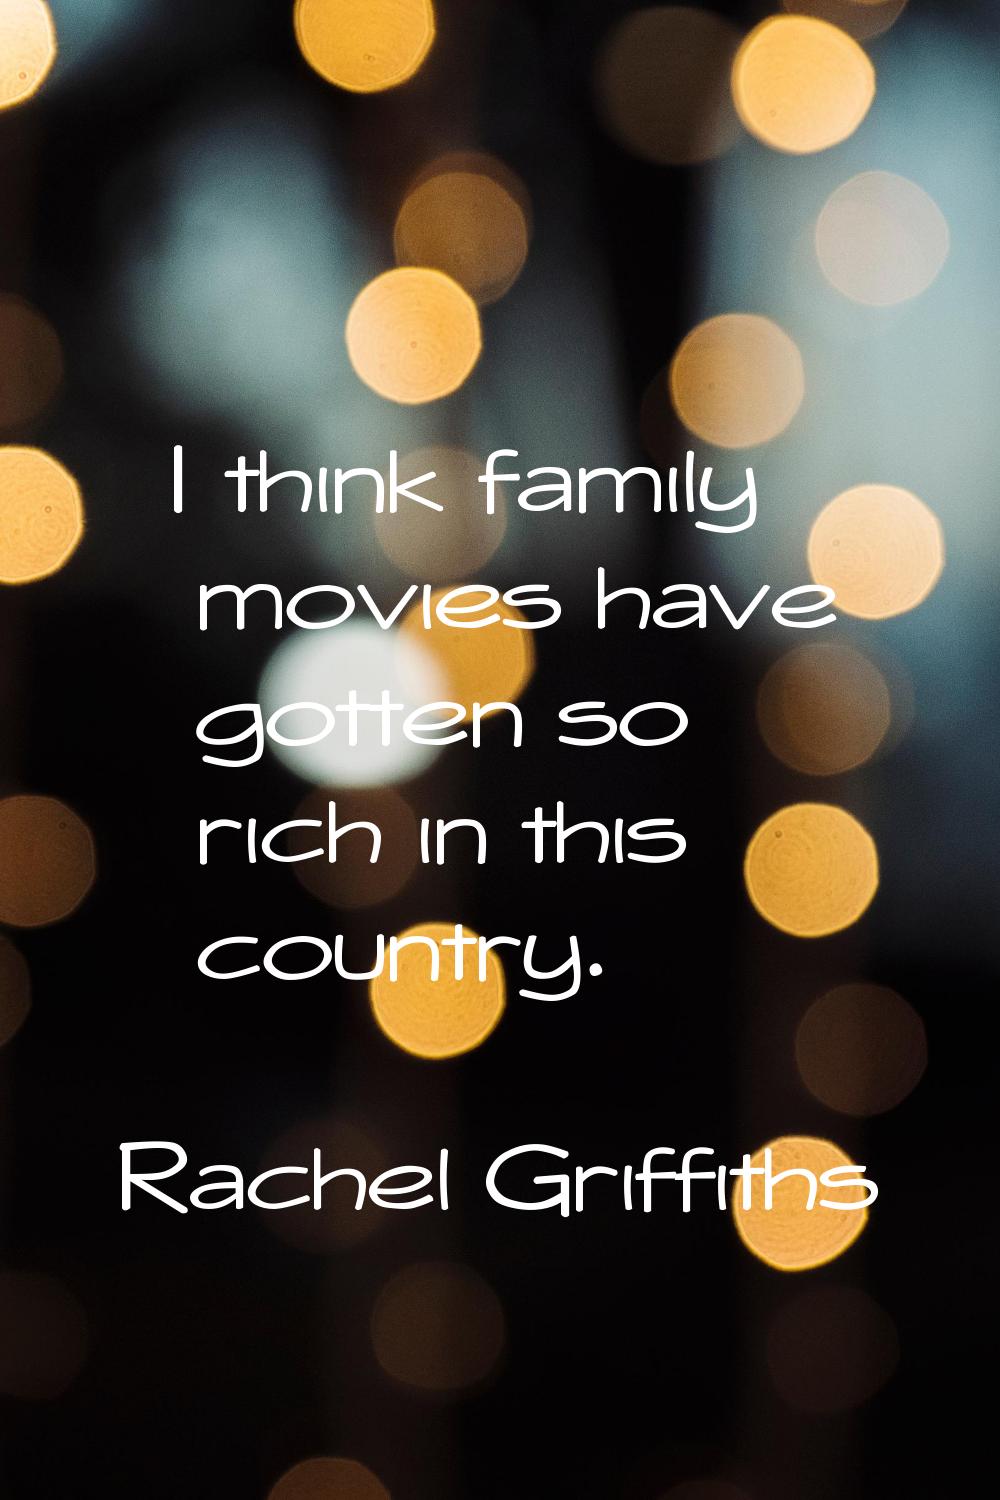 I think family movies have gotten so rich in this country.